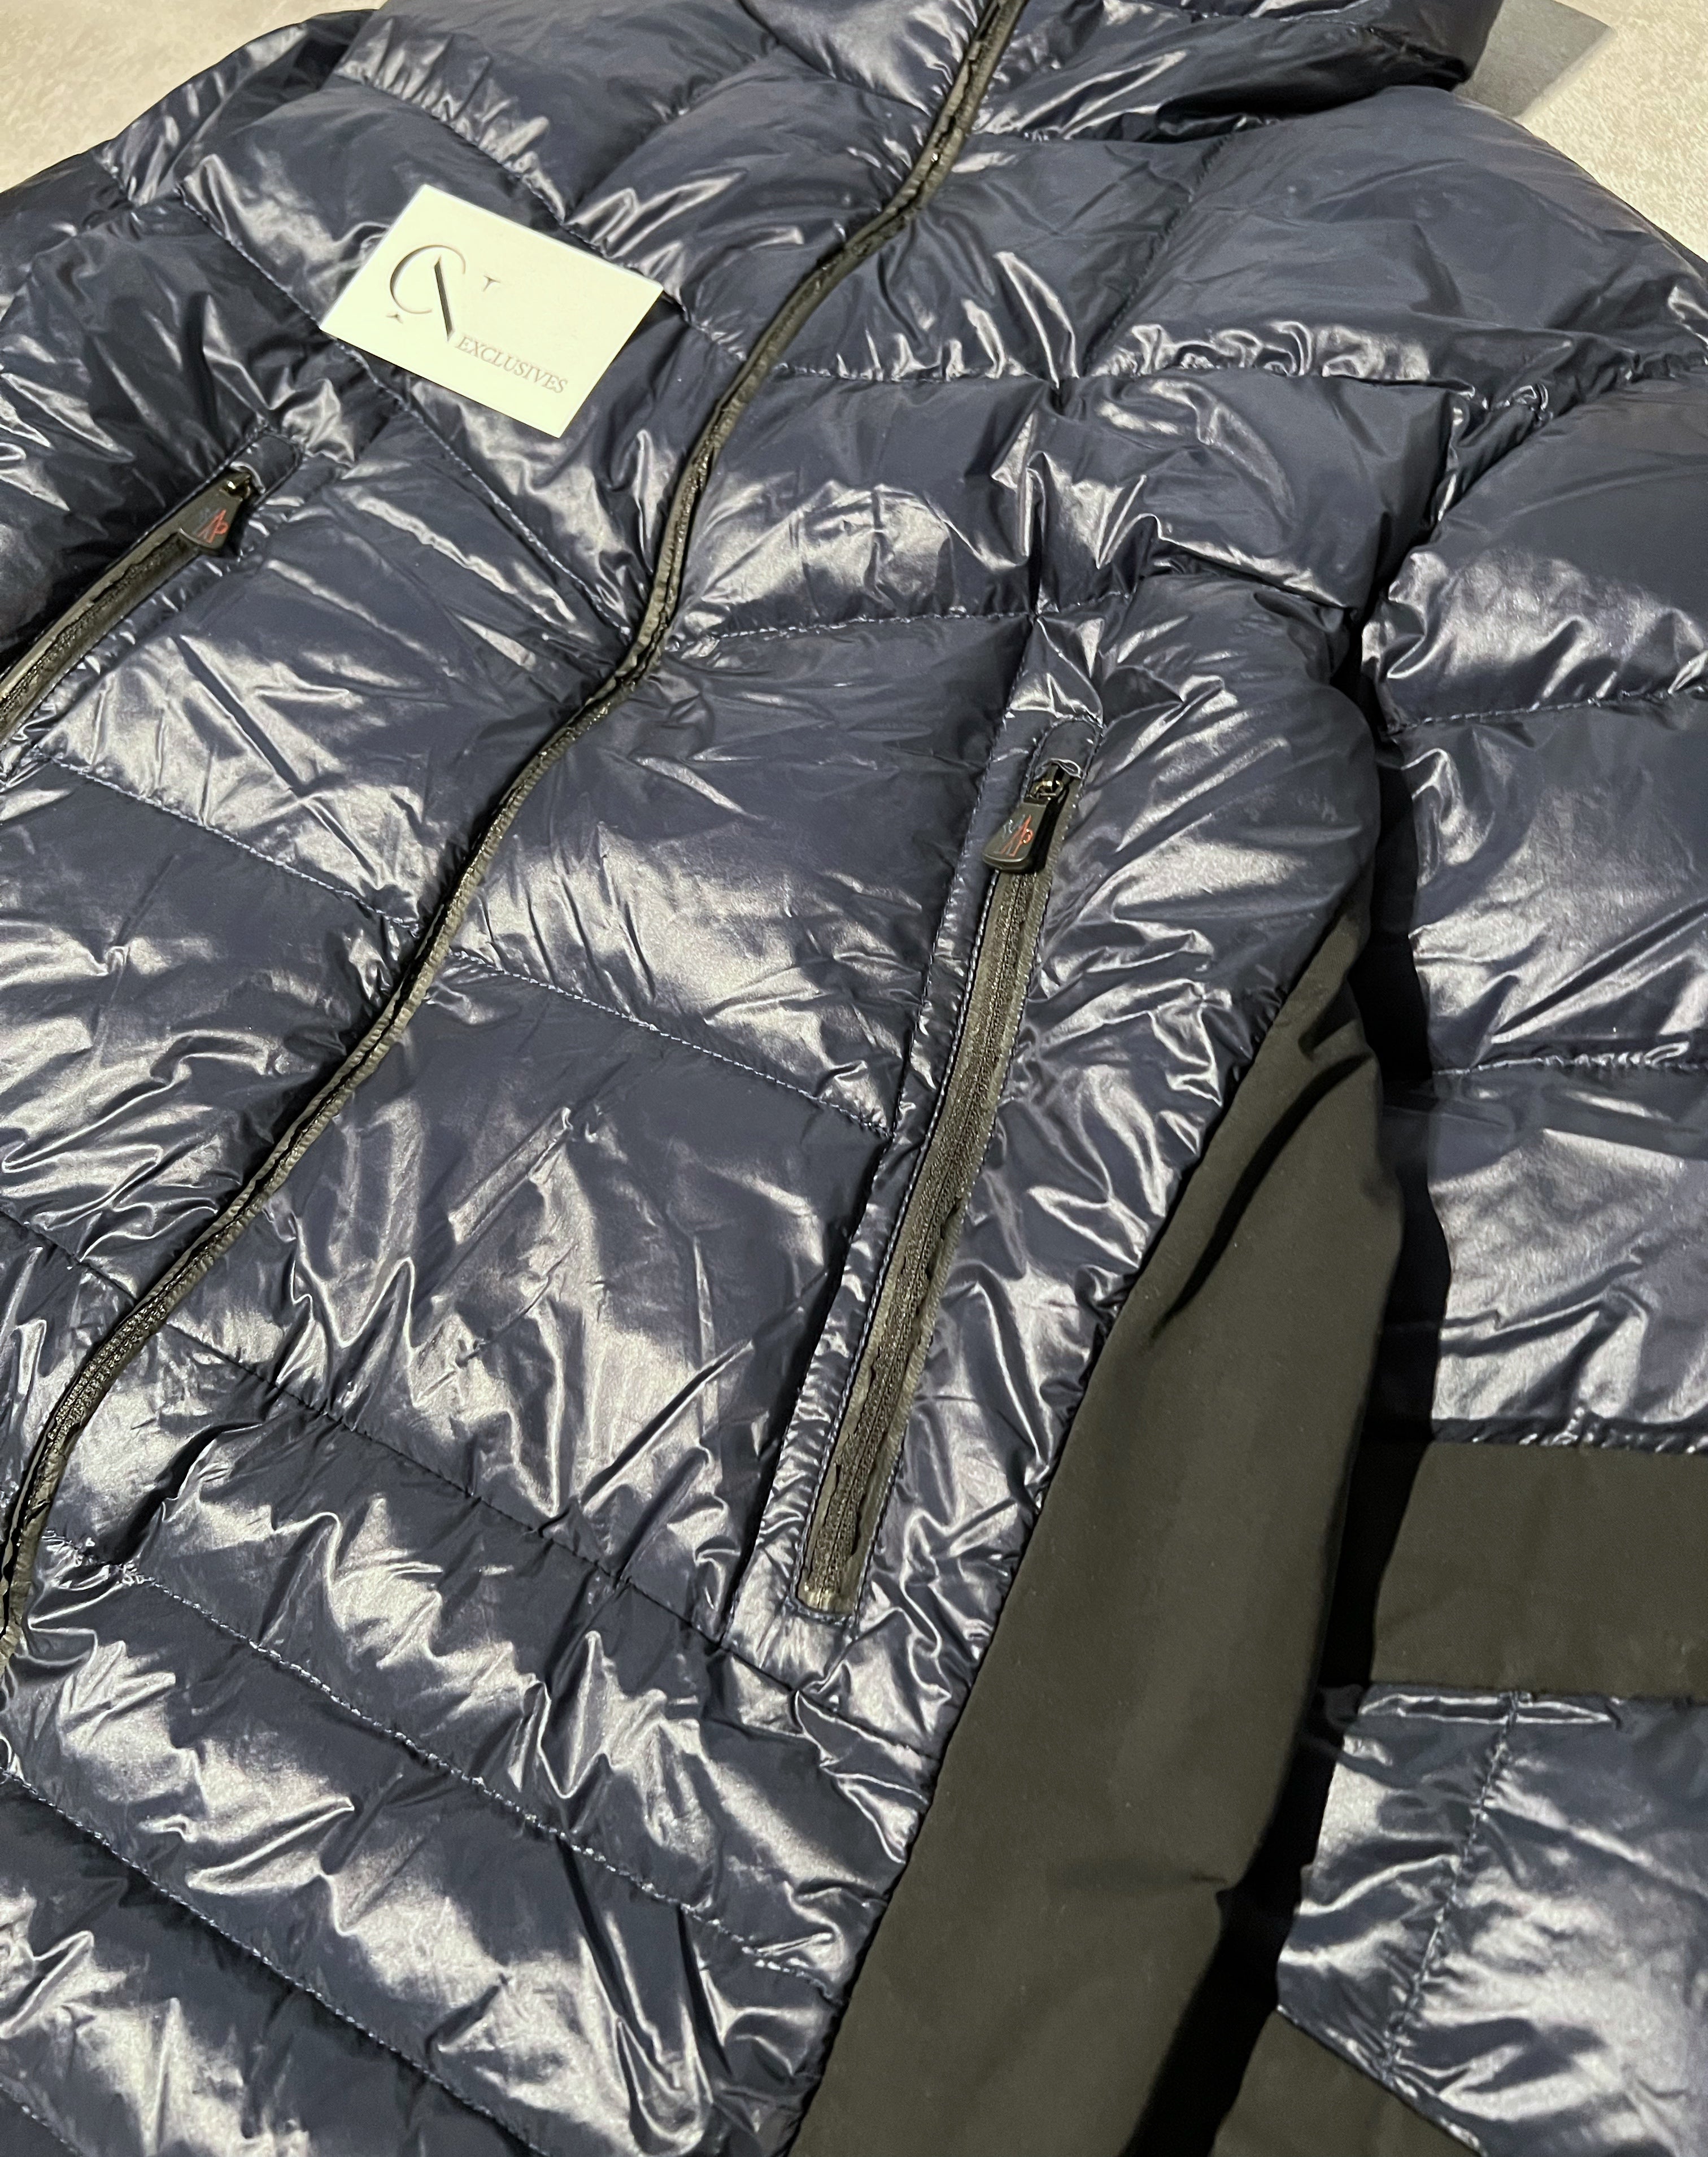 Moncler Canmore Skiing Jacket - Size 5